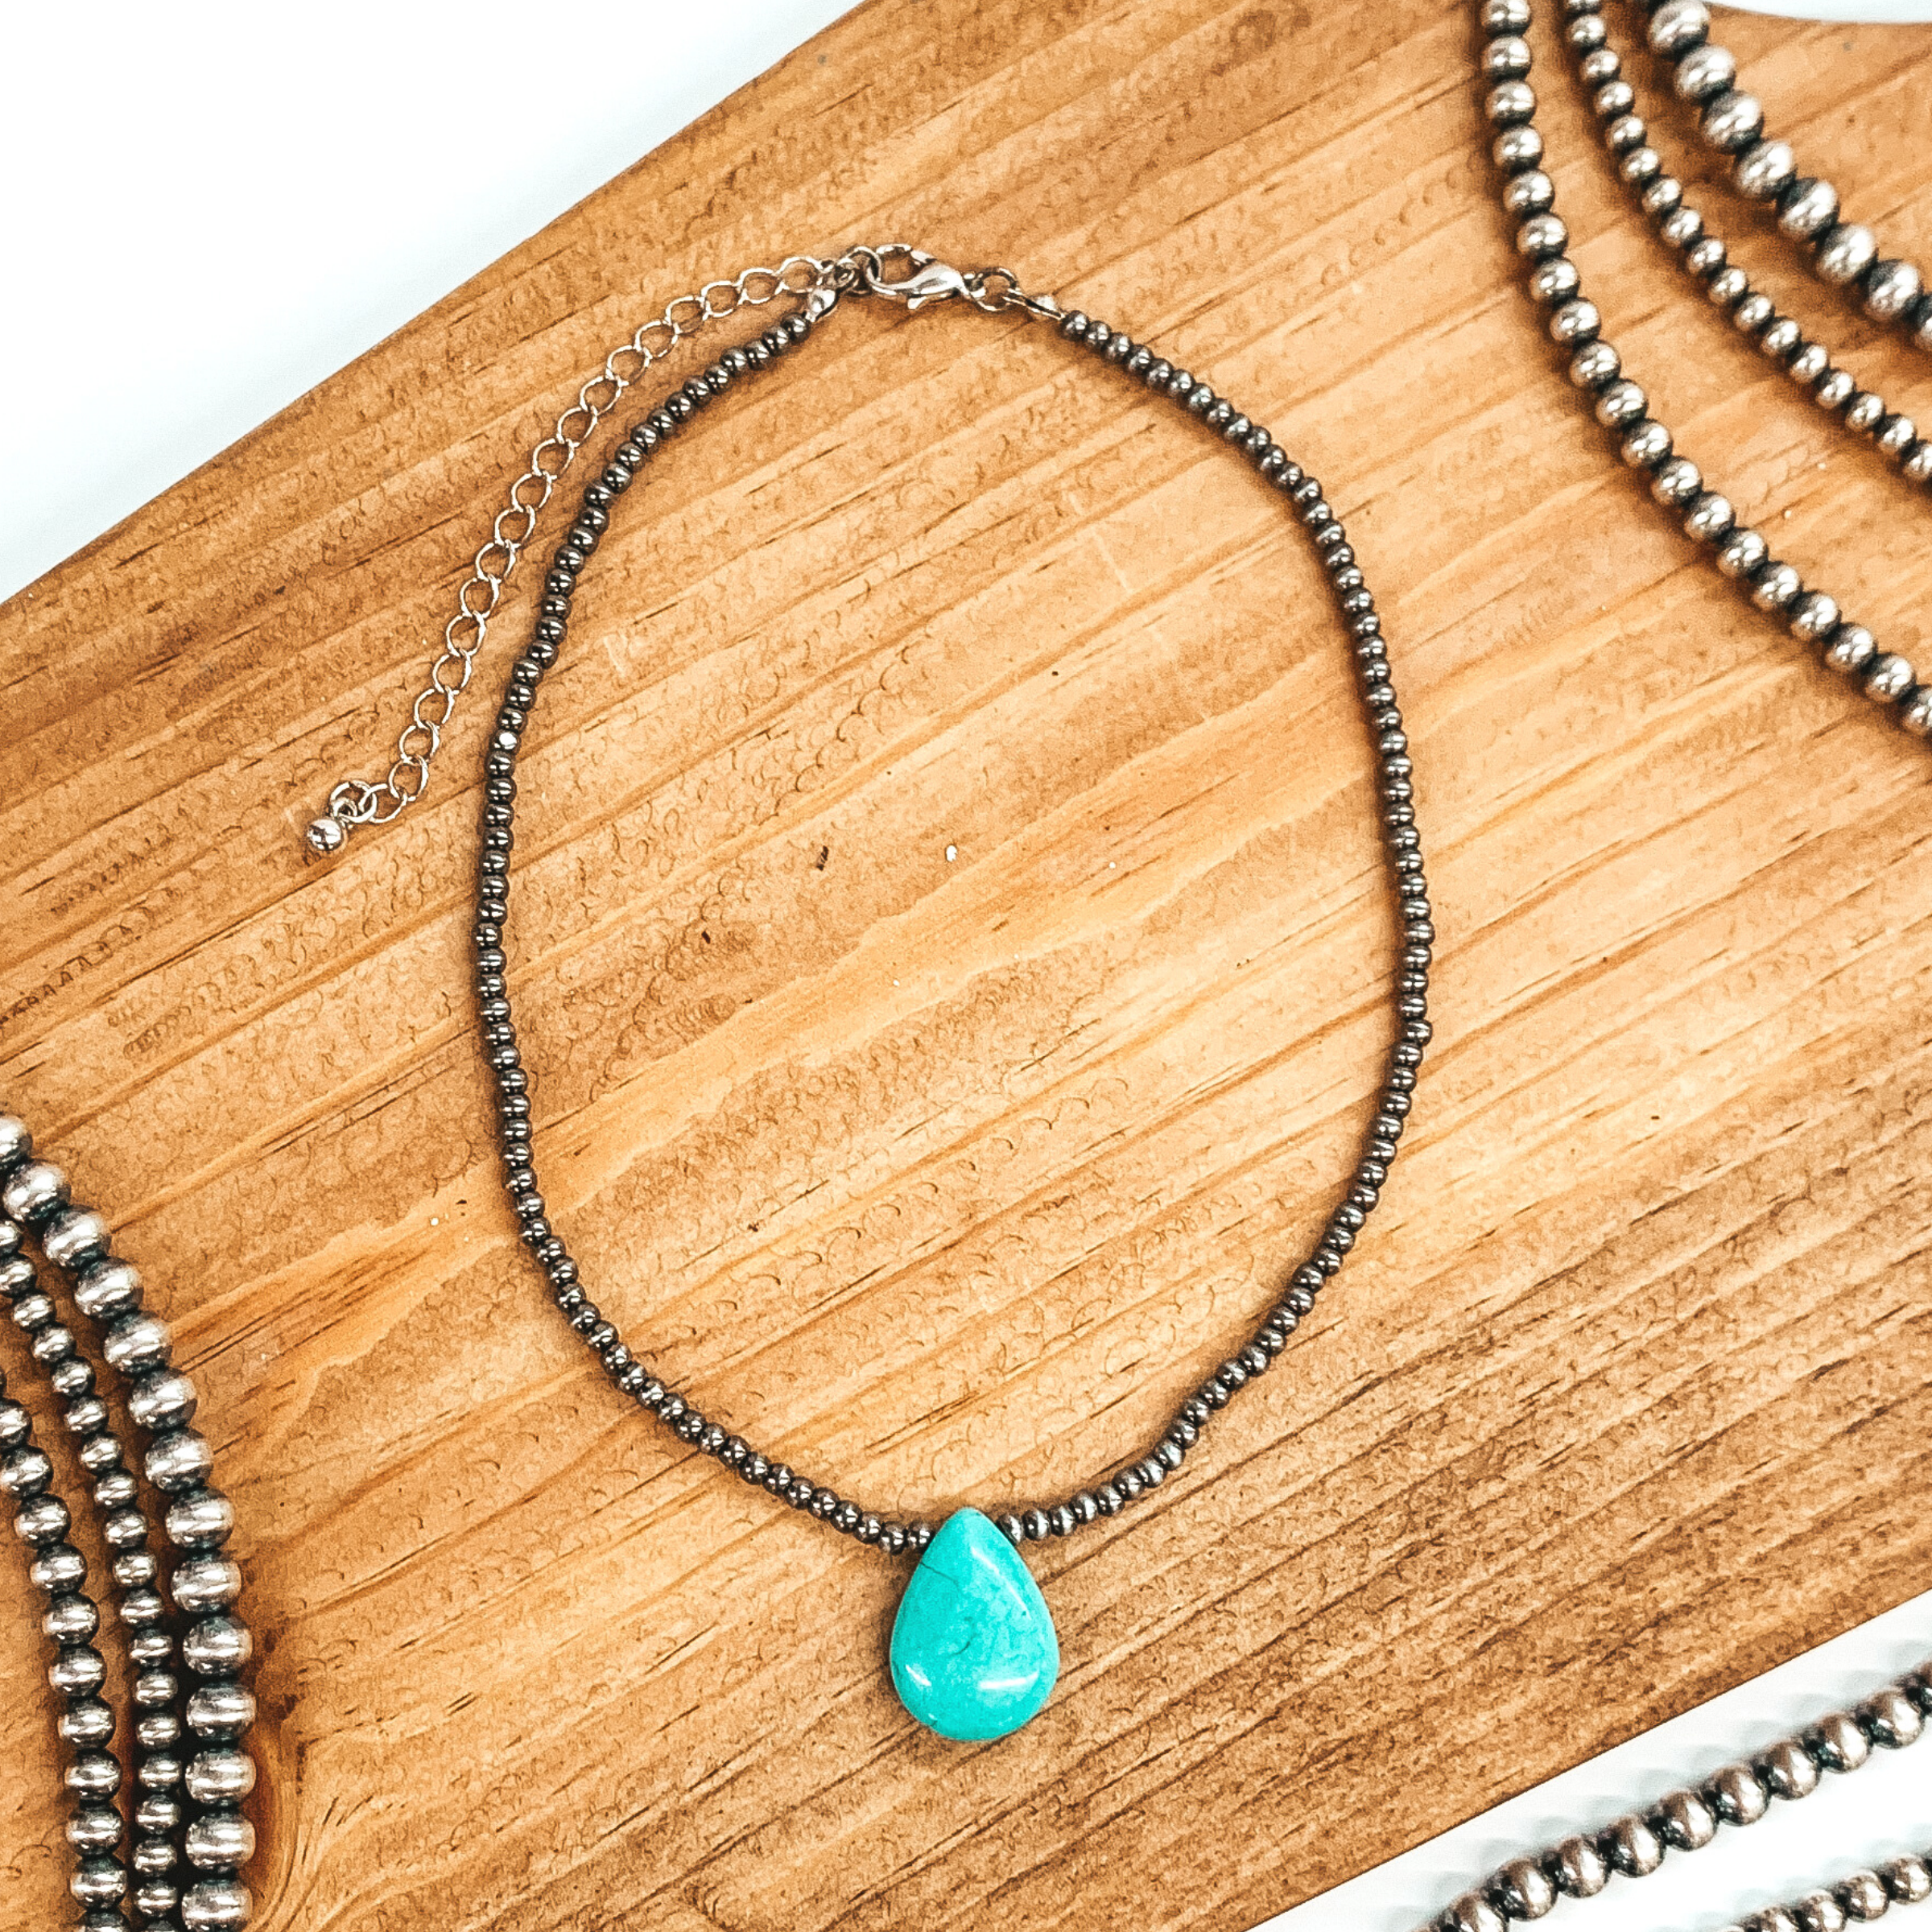 Beaded Choker Necklace With Stone Pendant in Turquoise - Giddy Up Glamour Boutique